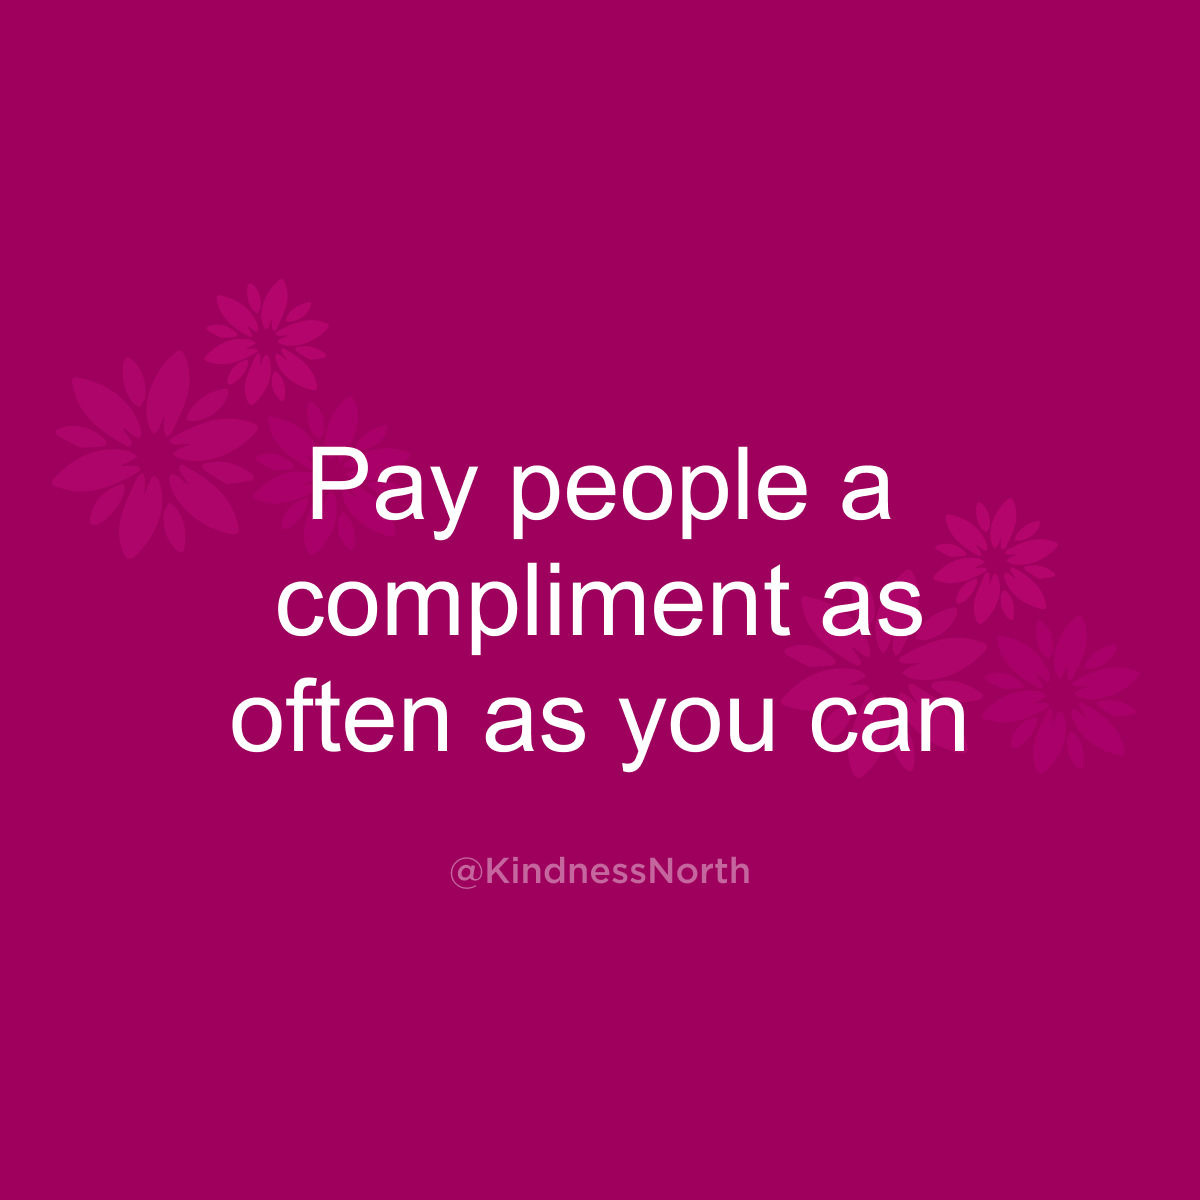 Pay people a compliment as often as you can